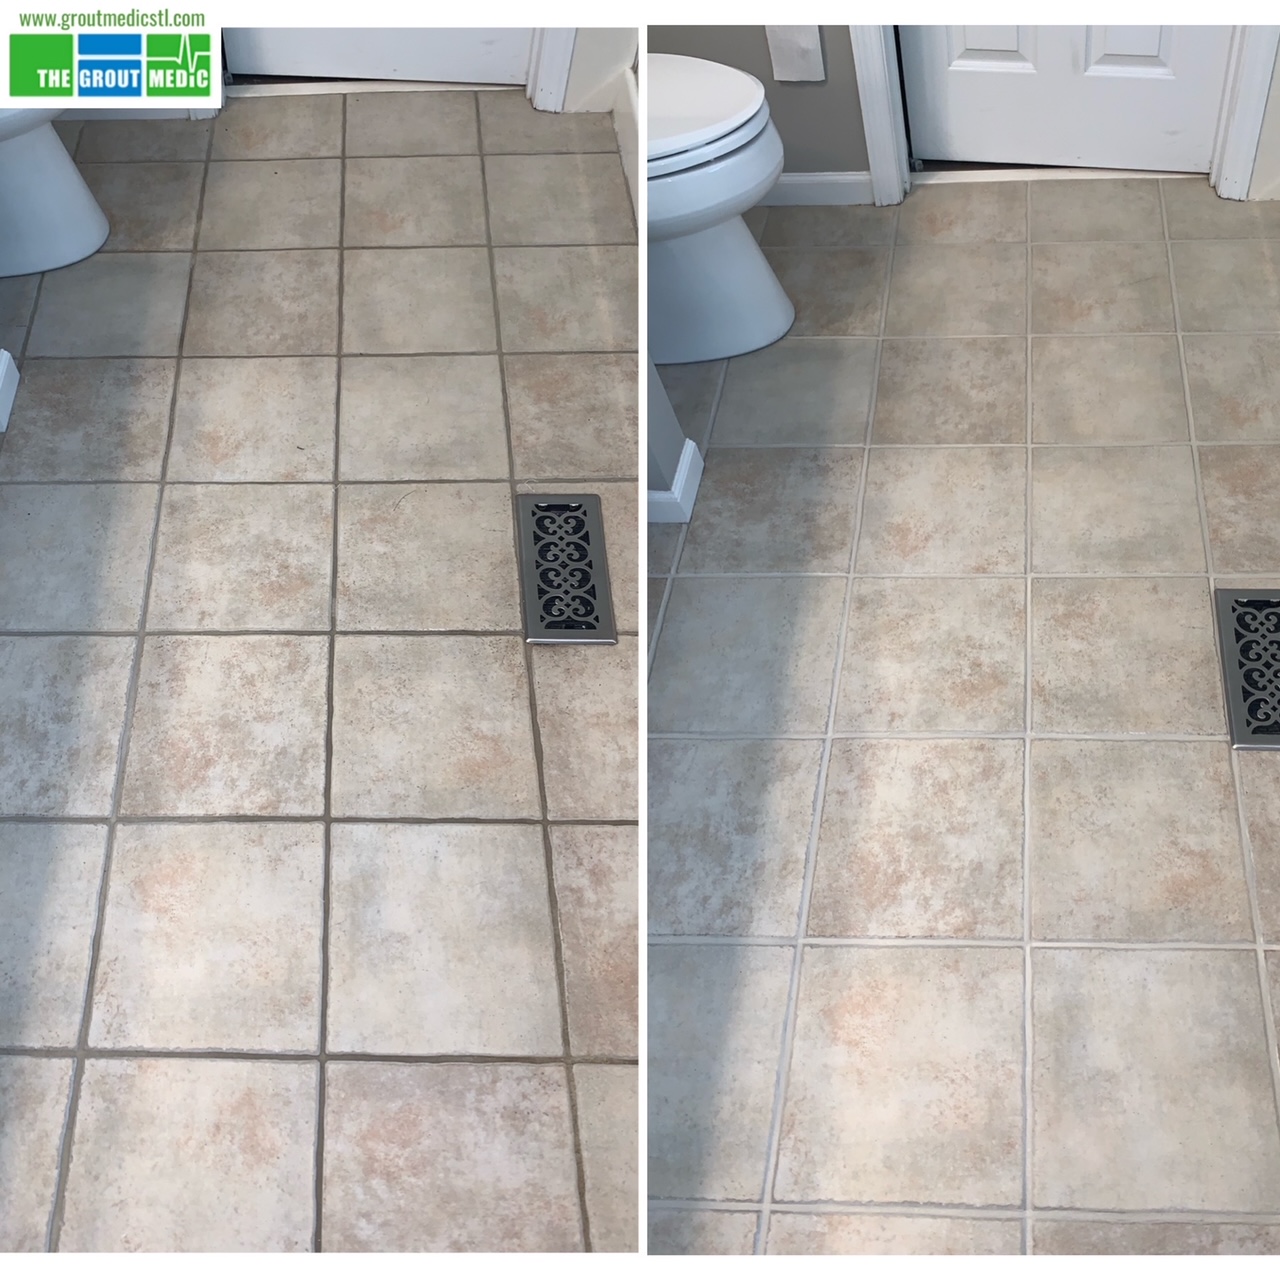 grout cleaning in Kirkwood, MO